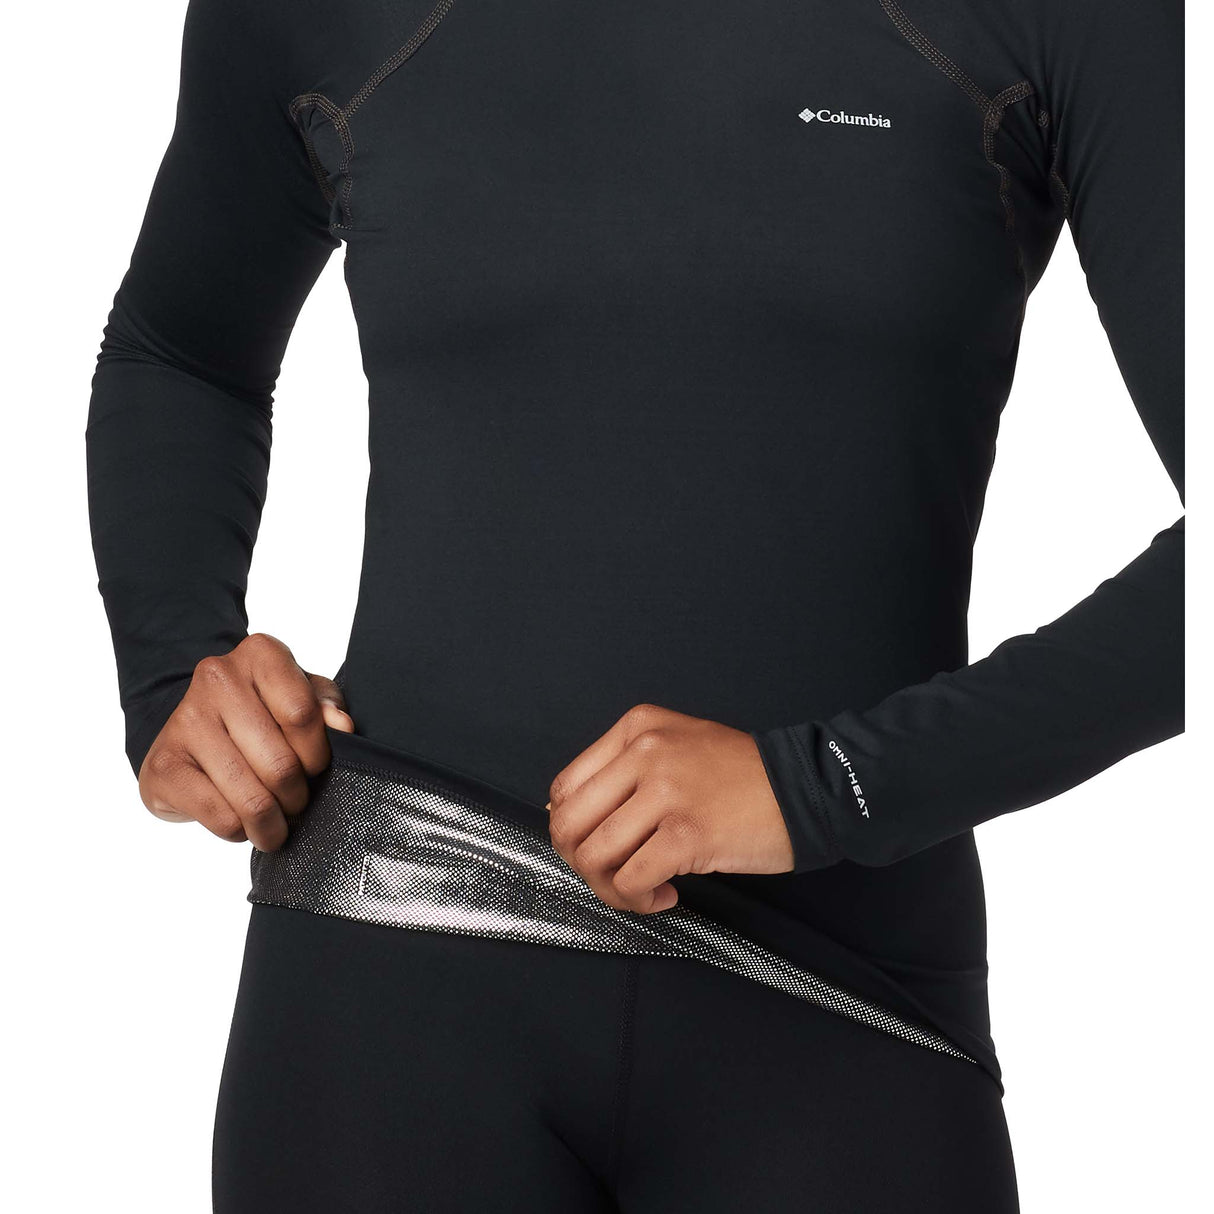 Columbia Heavyweight Stretch baselayer thermique noir femme isolant